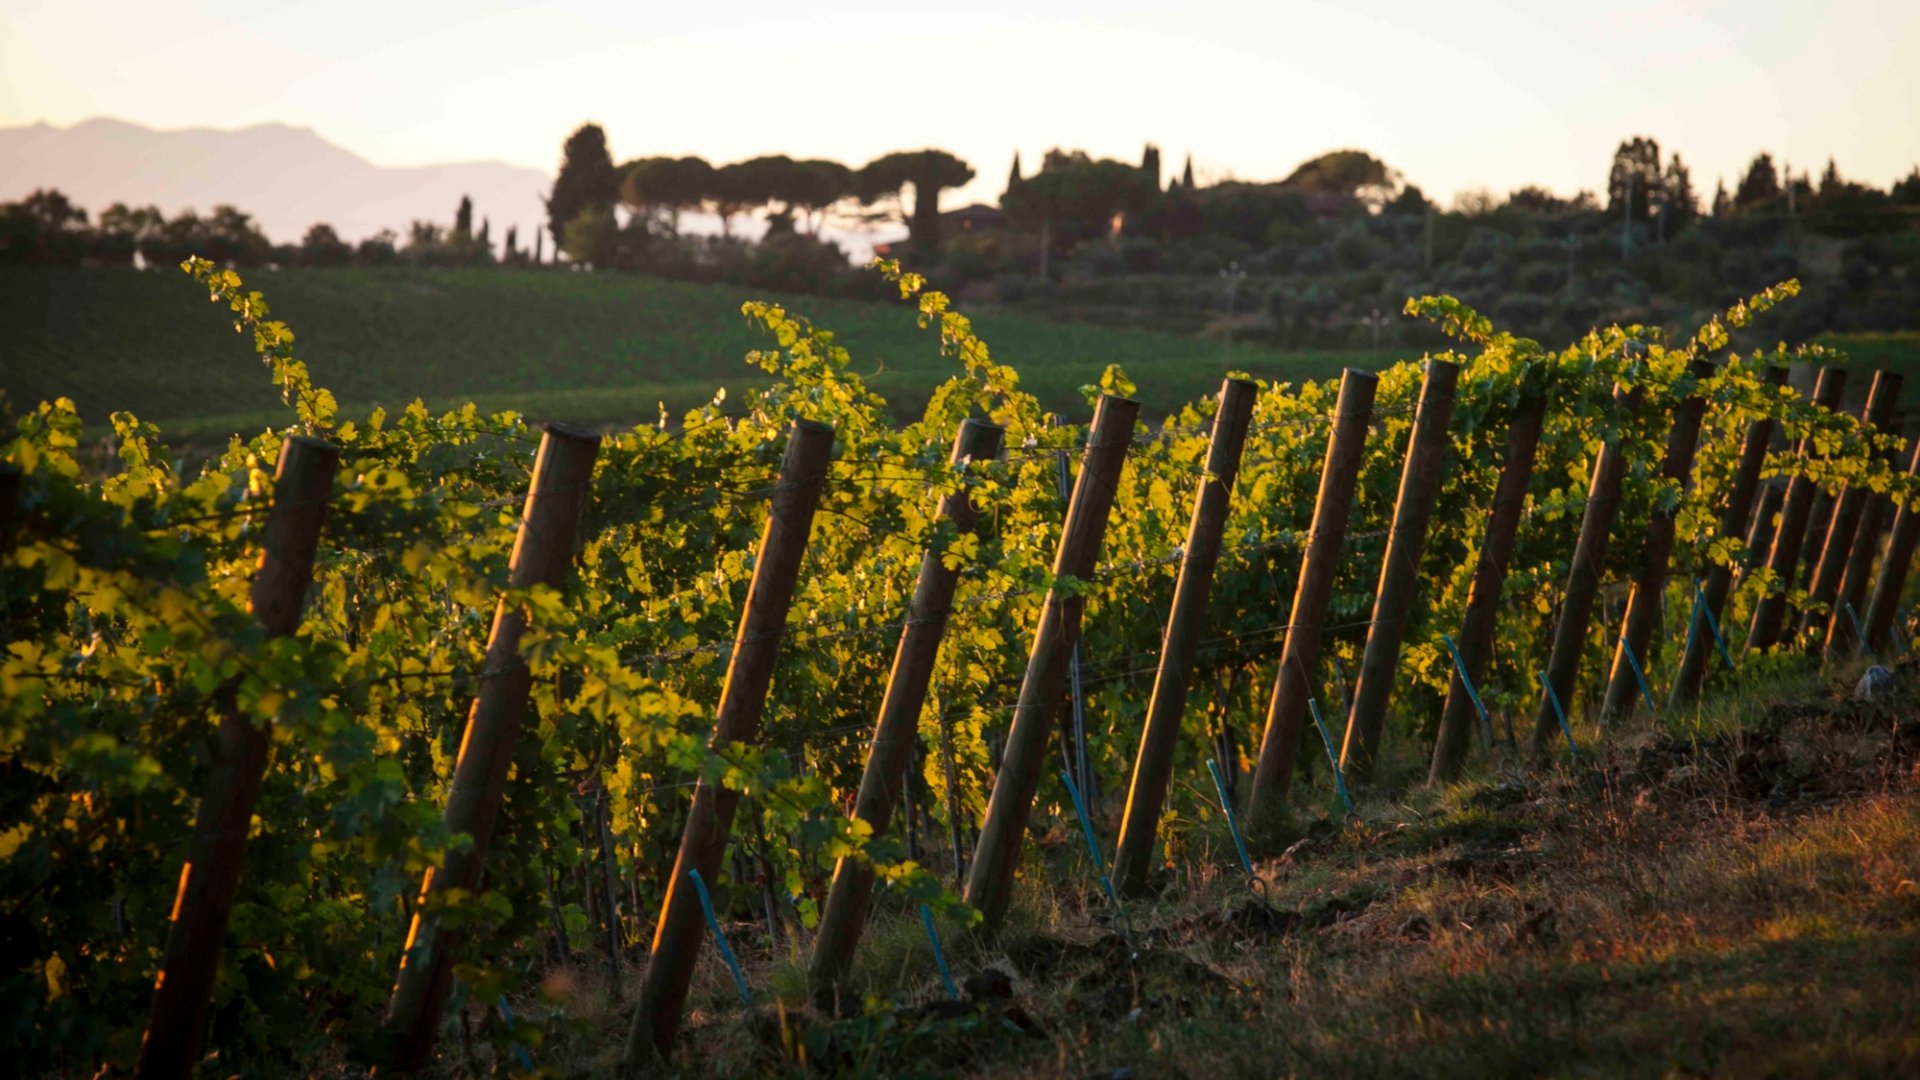 A long weekend with tasting and cooking experiences to discover the Tuscan flavors in Chianti